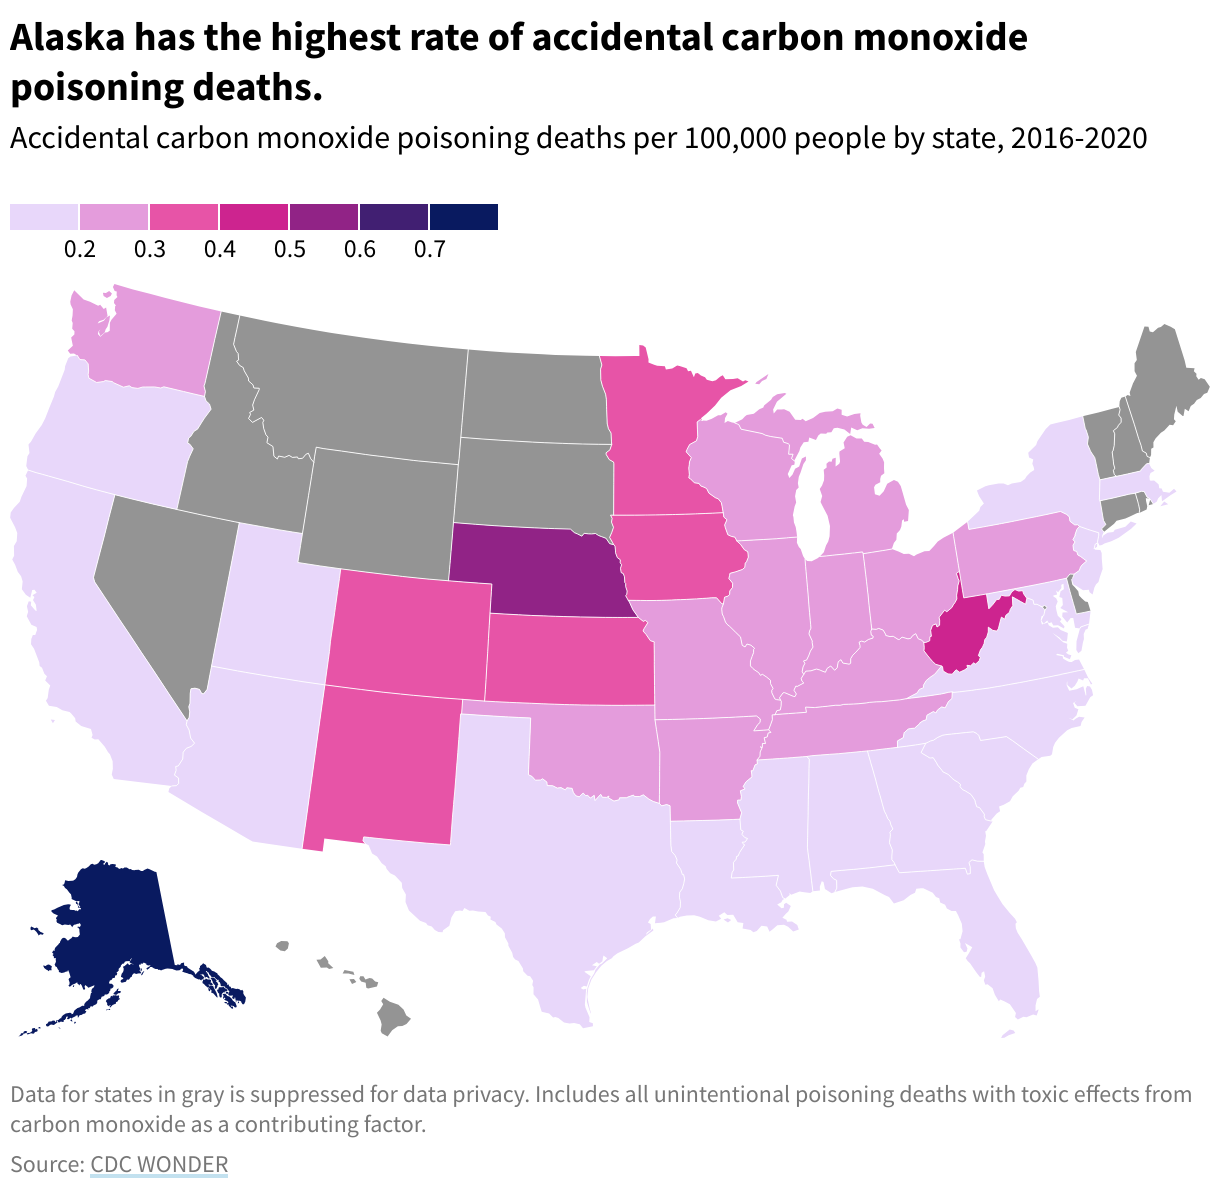 Map showing death rates between .1 to .8 per 100,000 population; Alaska has the highest at 0.8 per 100,000